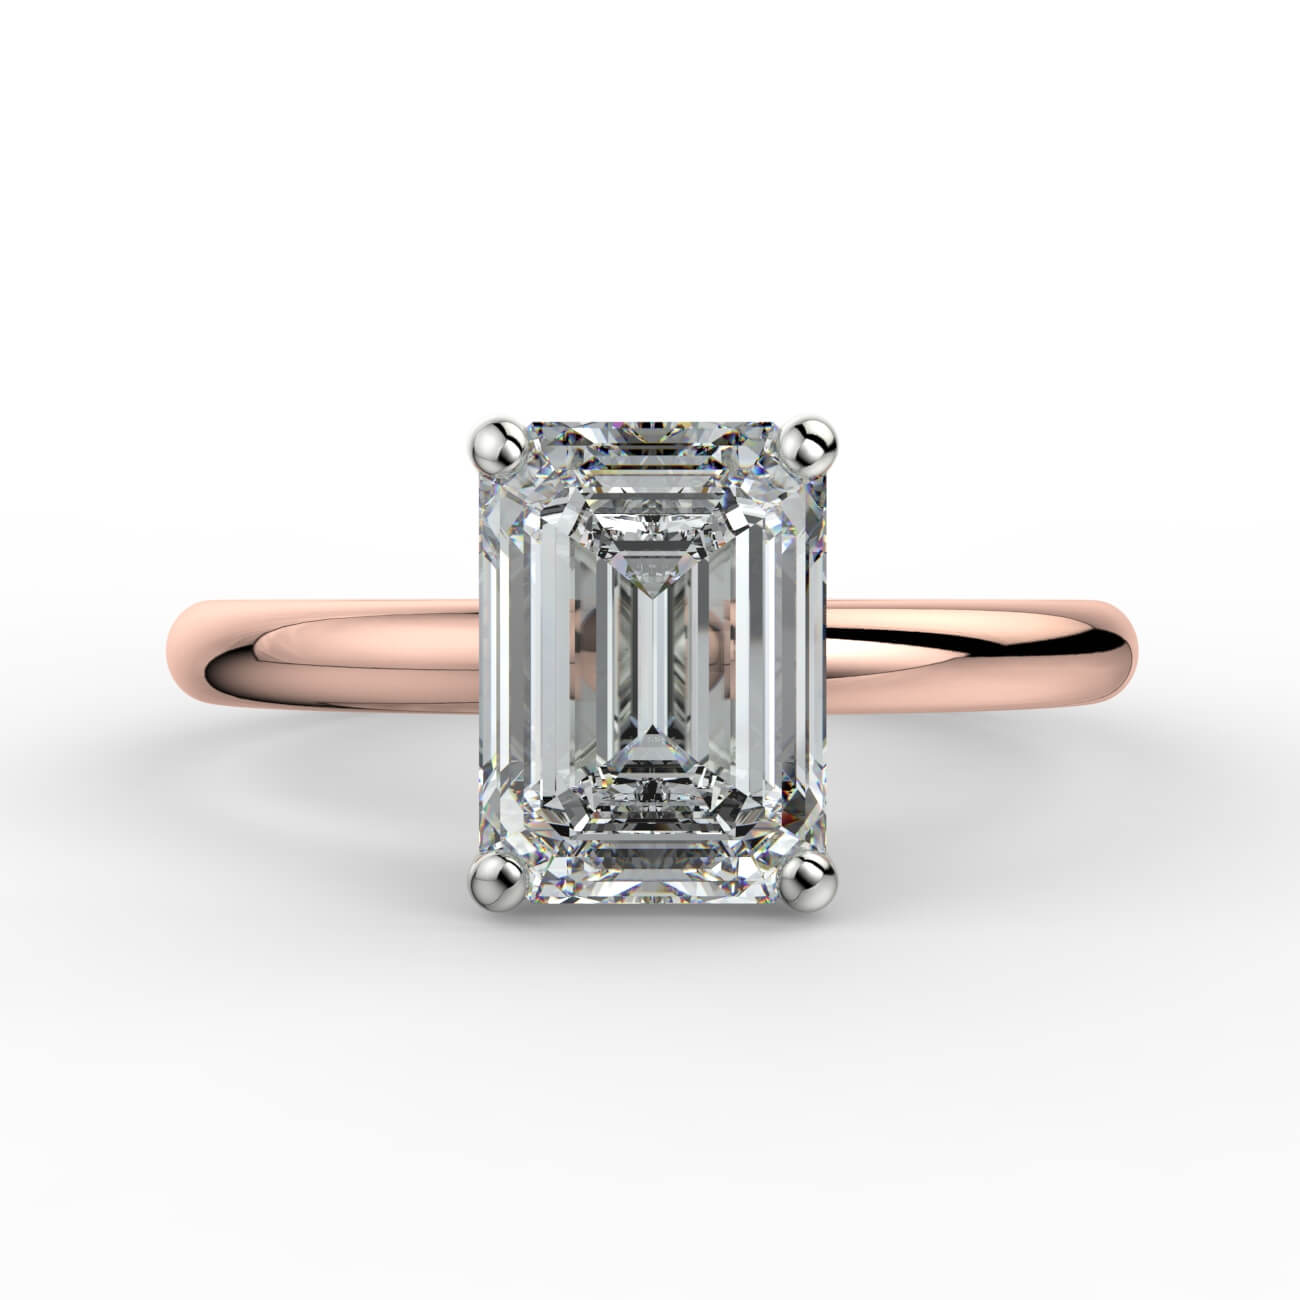 Solitaire emerald cut diamond engagement ring in white and rose gold – Australian Diamond Network